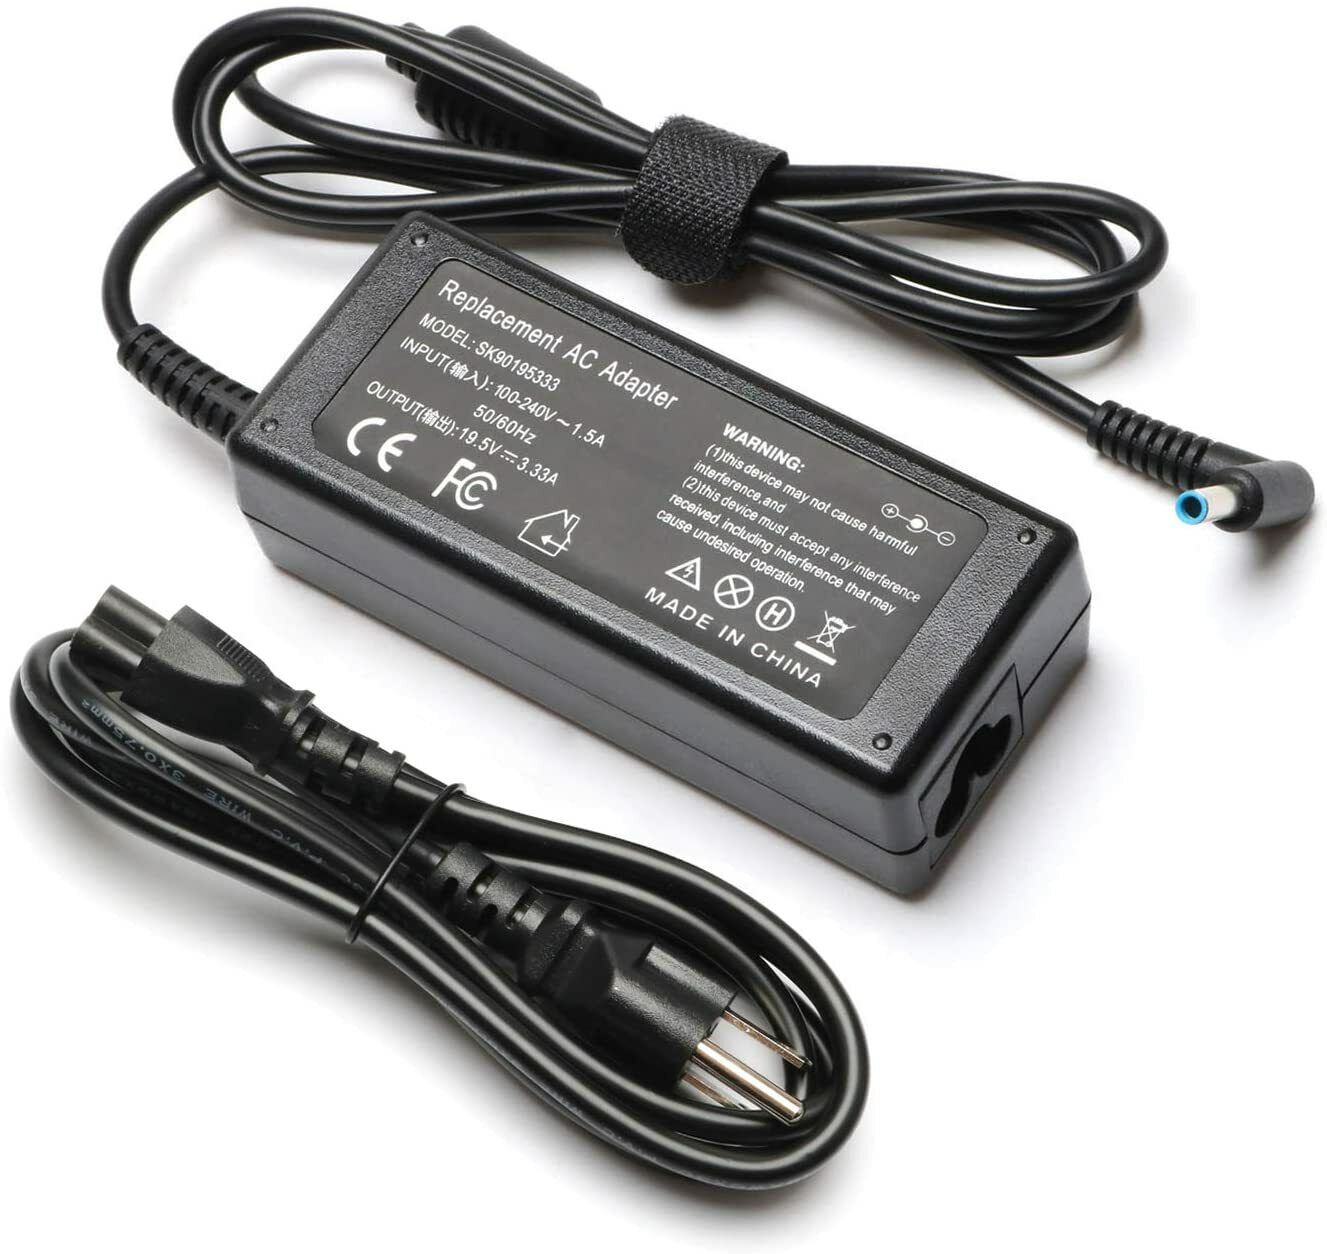 65W Laptop Charger for HP ProBook 640 G2 650 G2 / 450 430 440 446 455 470 G3 G5 